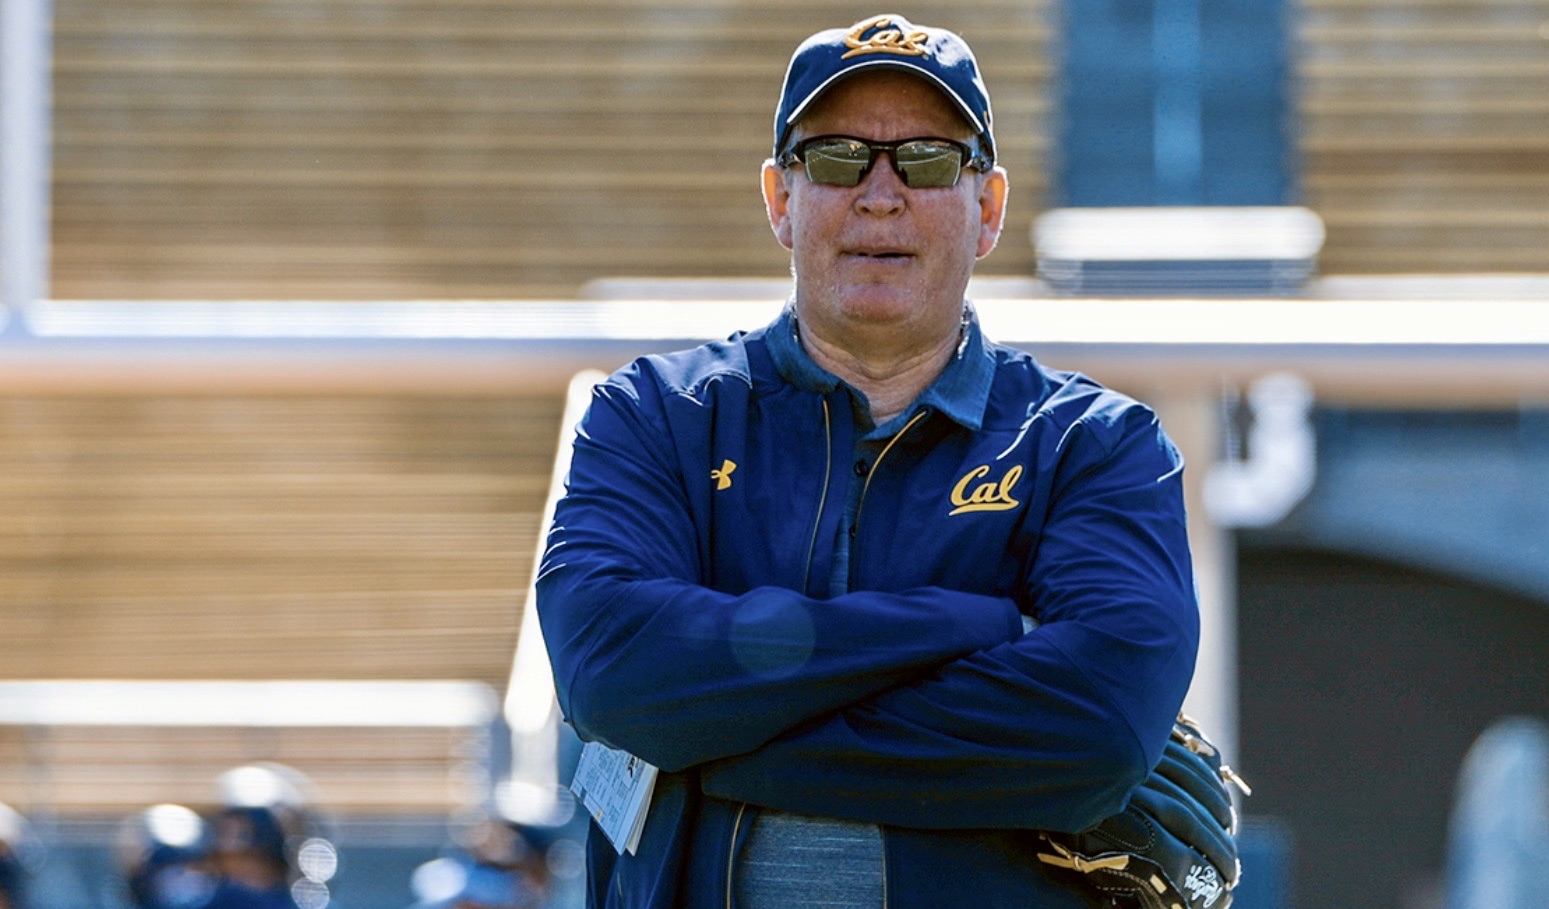 Now Is the Time to Work on Trick Plays, Says Cal Offensive Coordinator Bill Musgrave